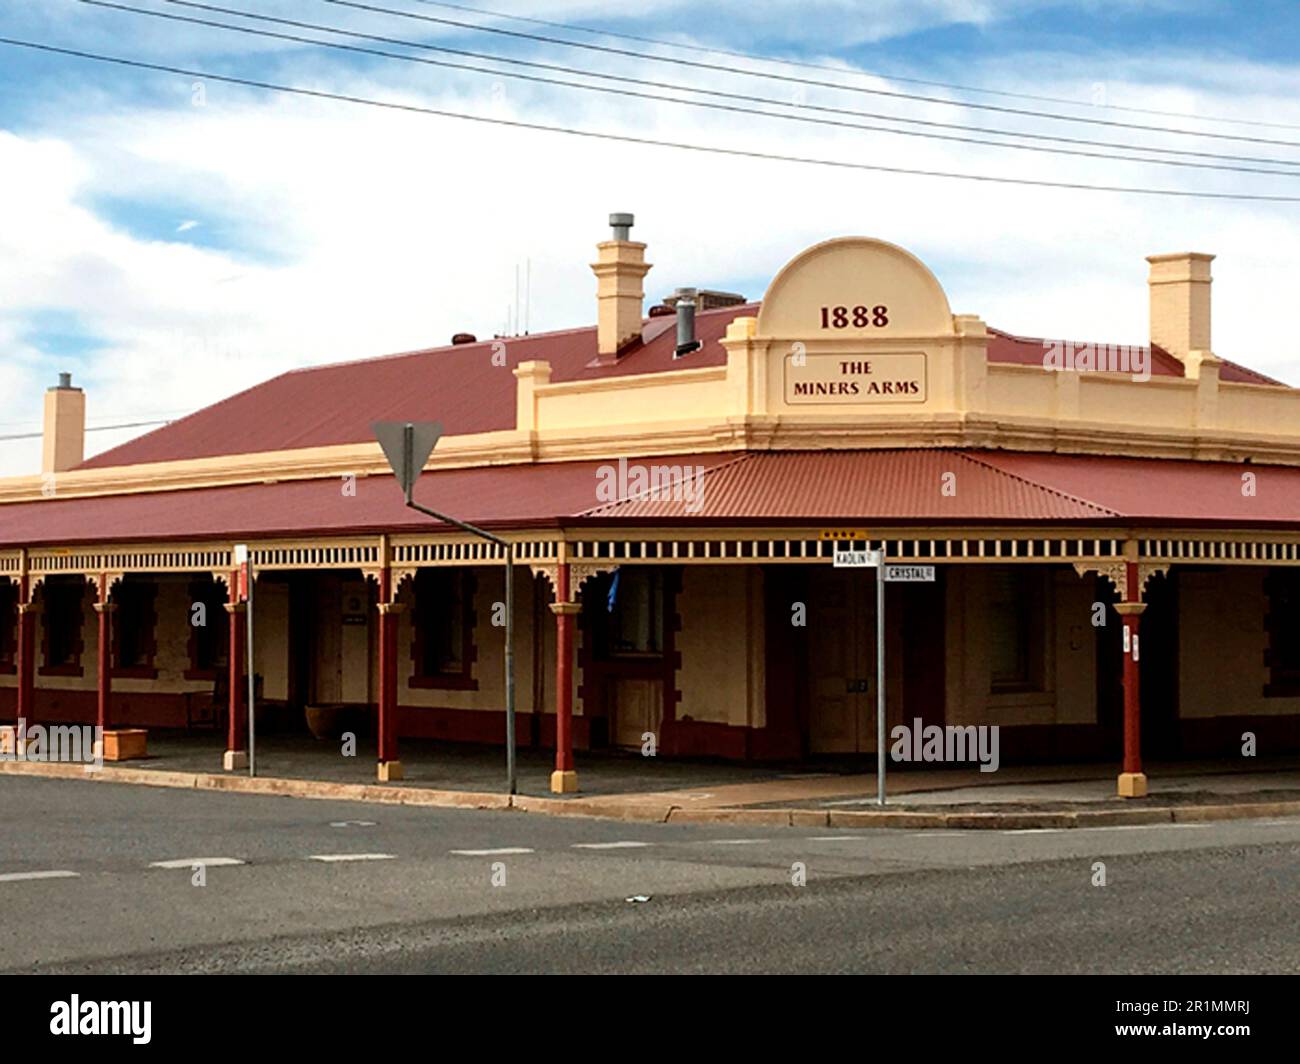 The Miners Arms pub in Broken Hill, built in 1888, NSW Australia Stock Photo